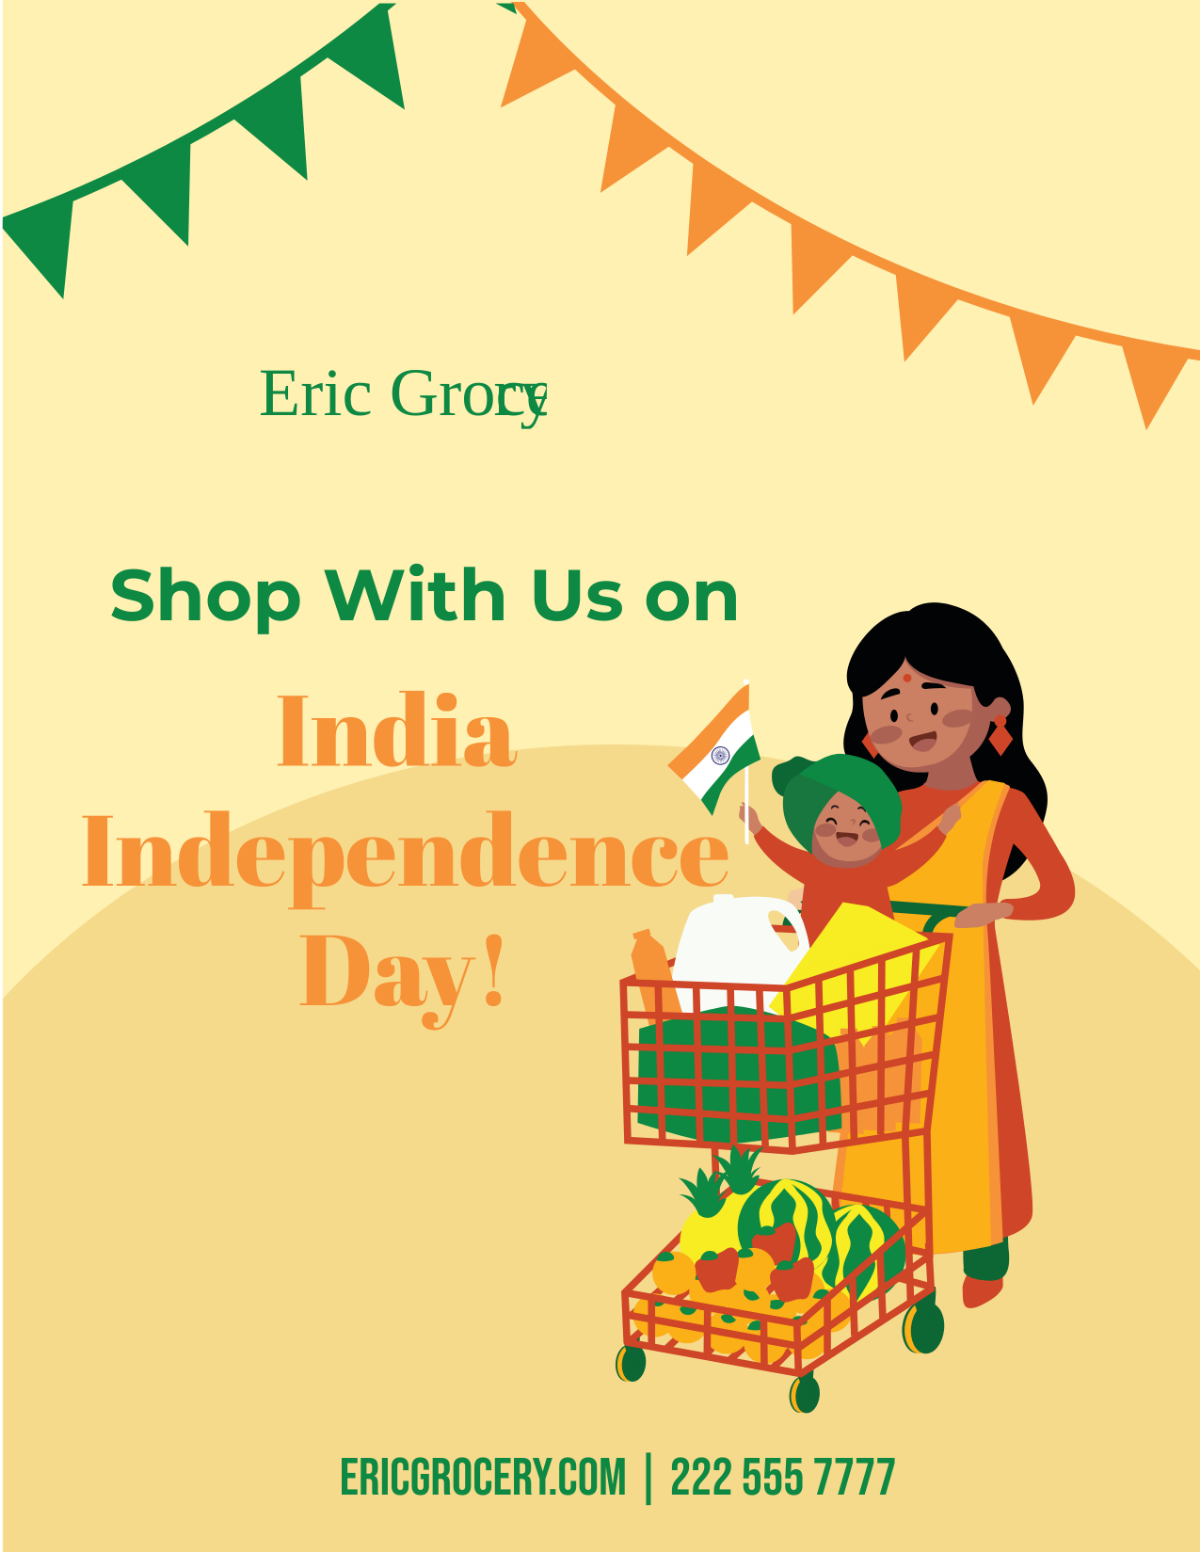 India Independence Day Flyer Template